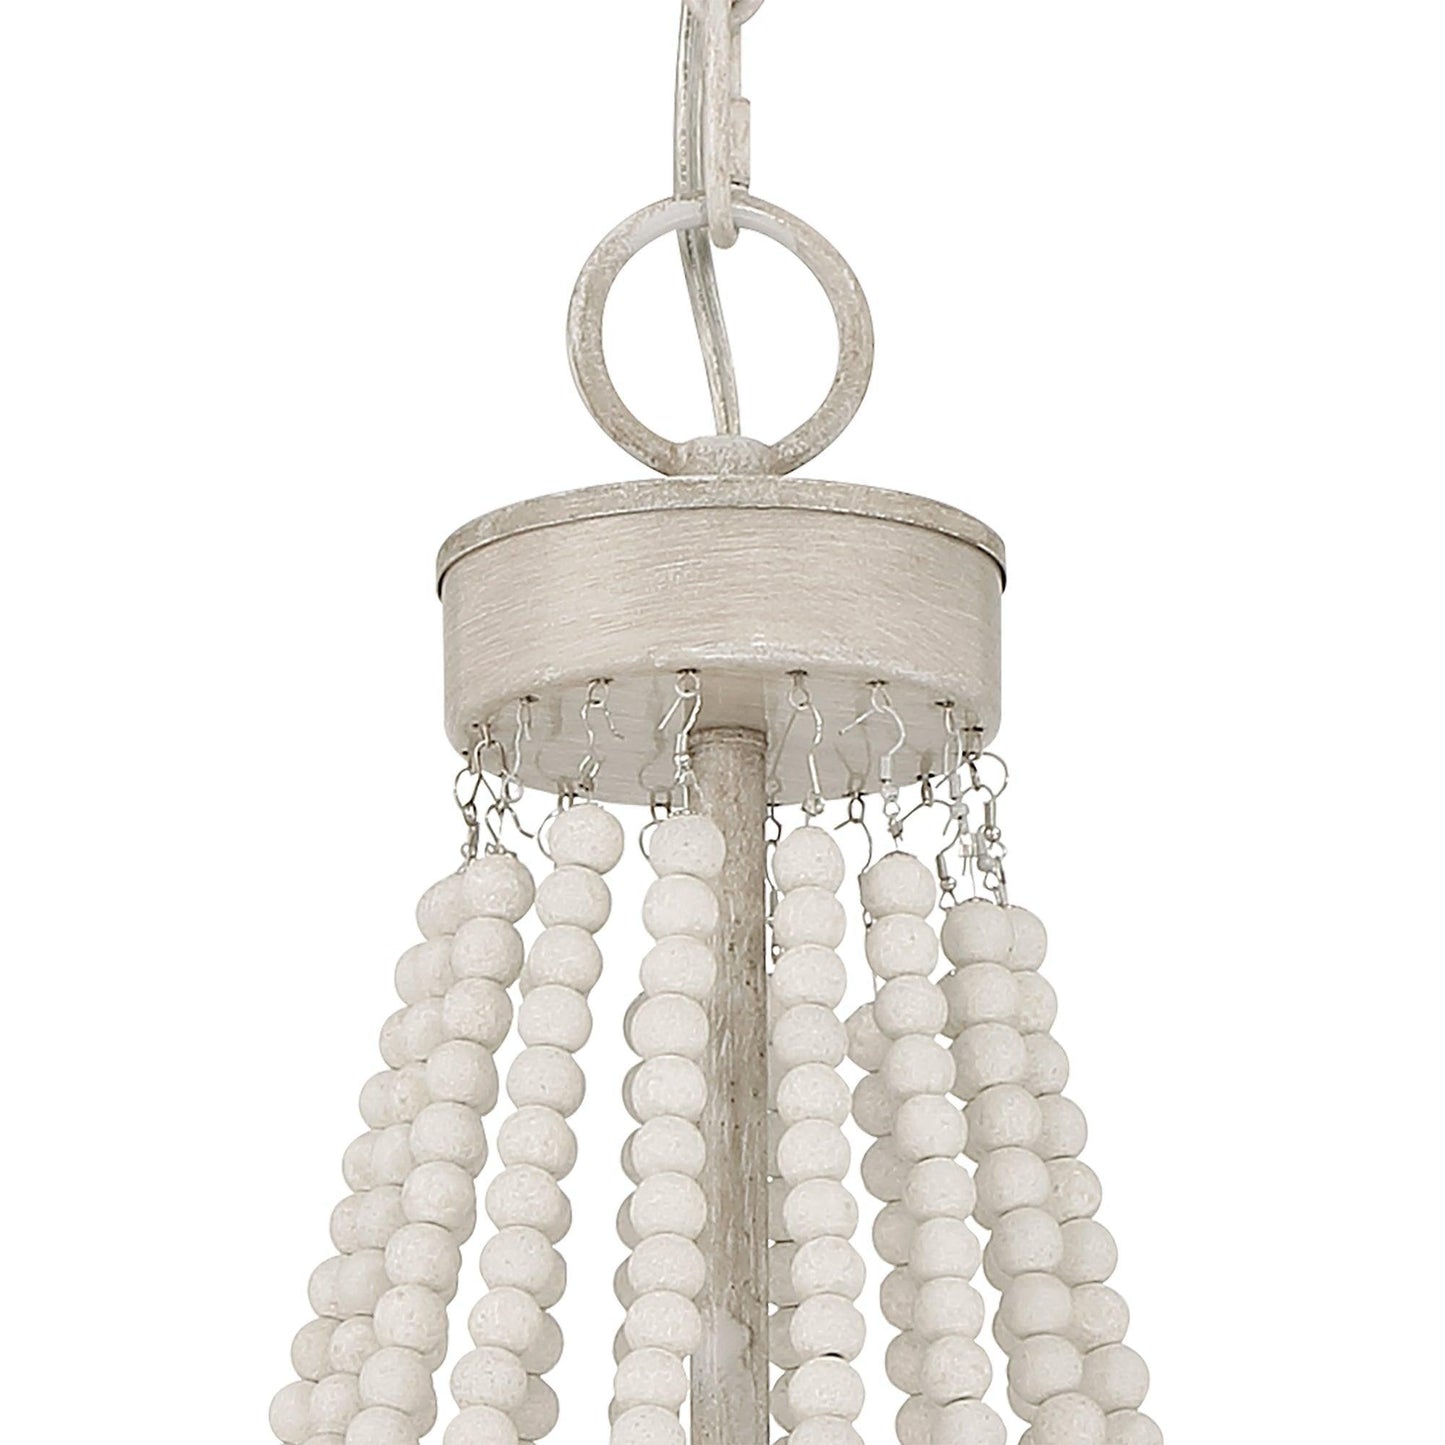 4 light wood beaded chandelier (18) by ACROMA